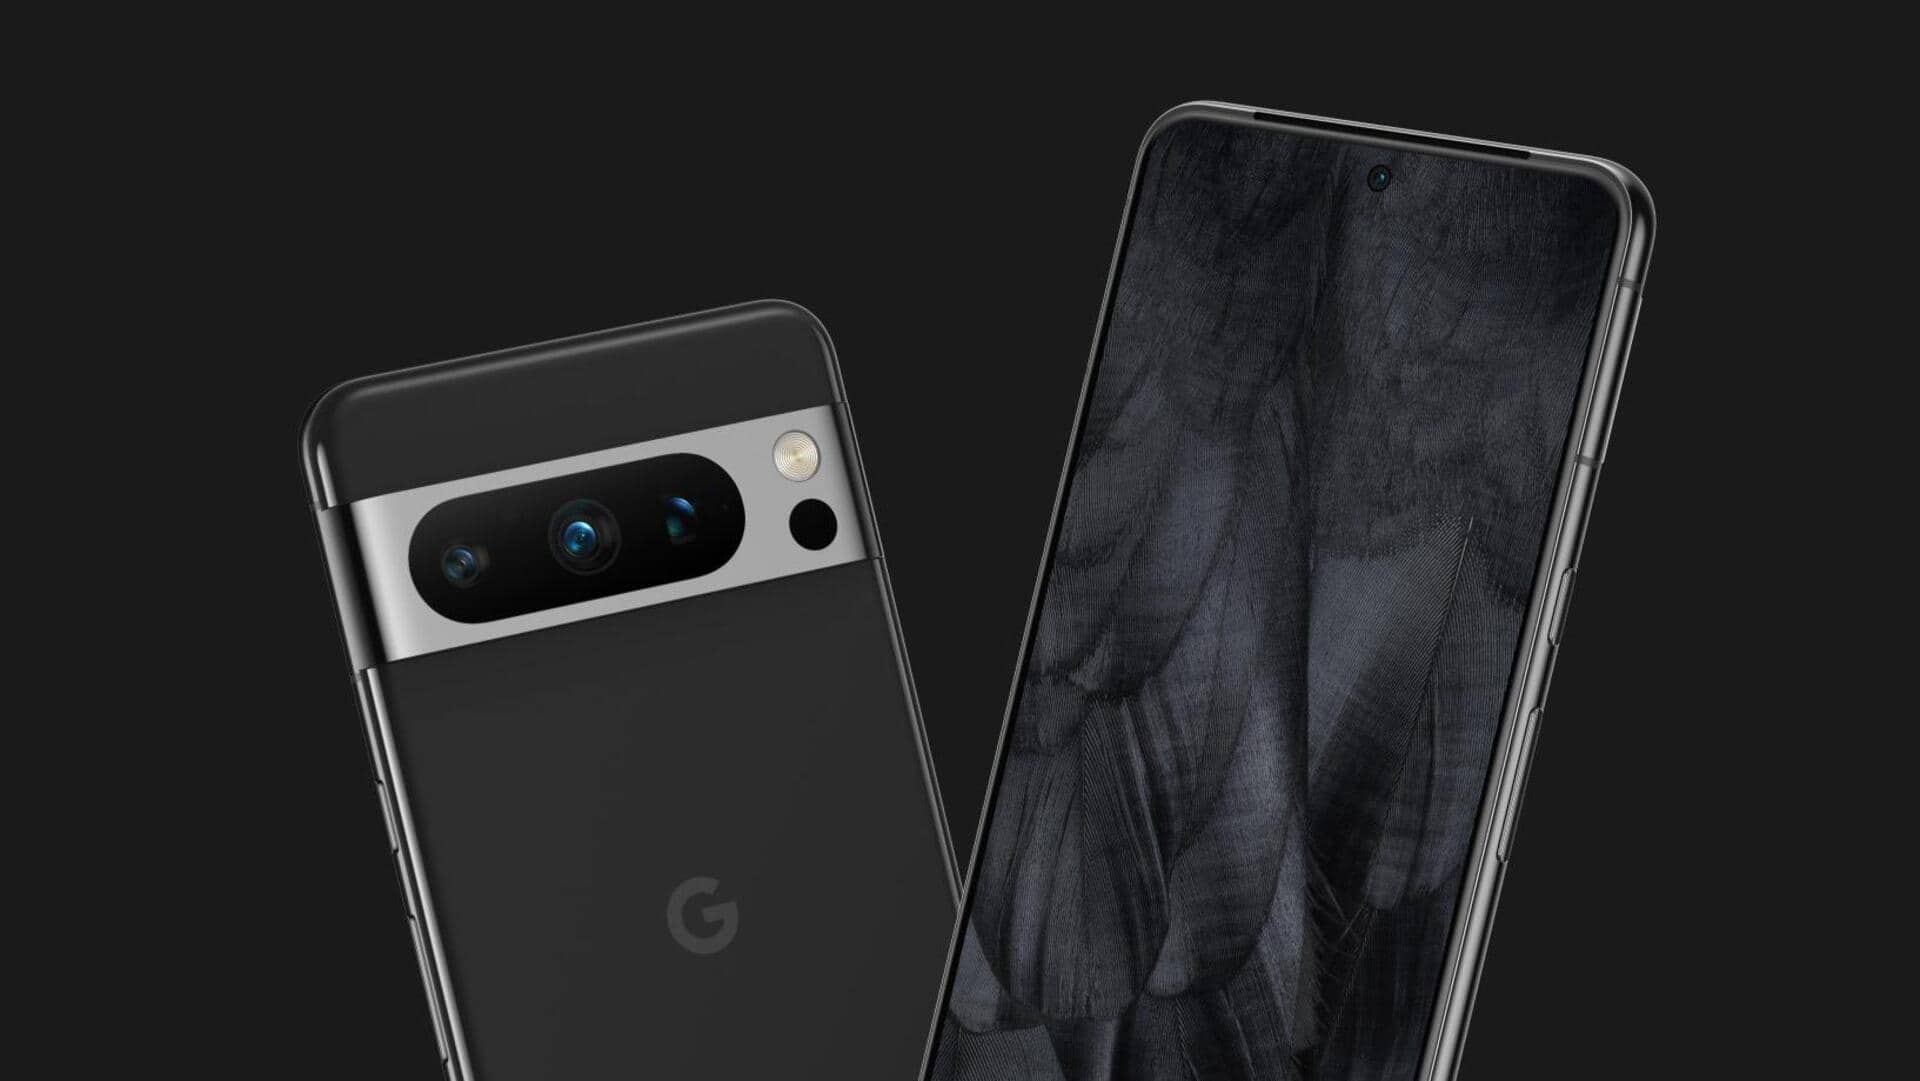 Google Pixel 8 Pro's specifications, launch timeline leaked